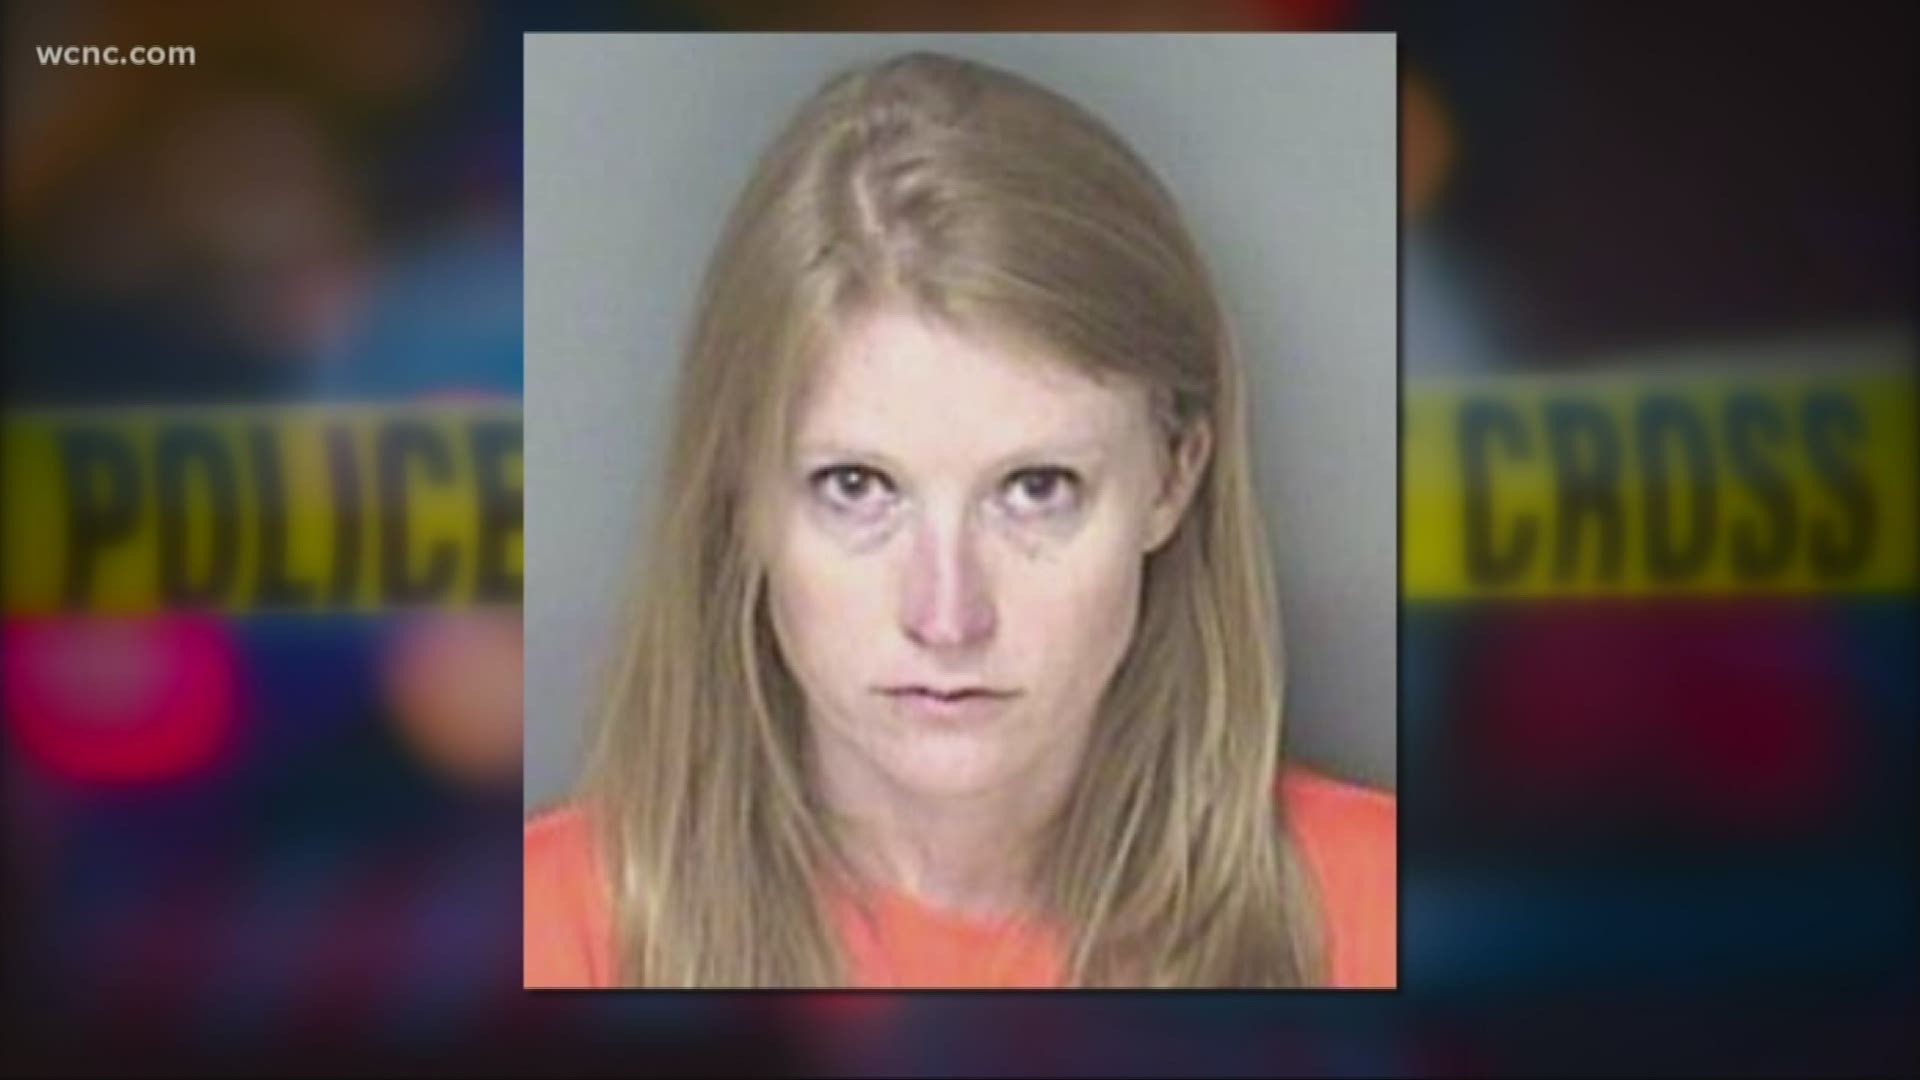 Gaston Co. Police say Lisa Rothwell had a sexual relationship with a student last school year while working as an assistant principal at Stuart Cramer High School.